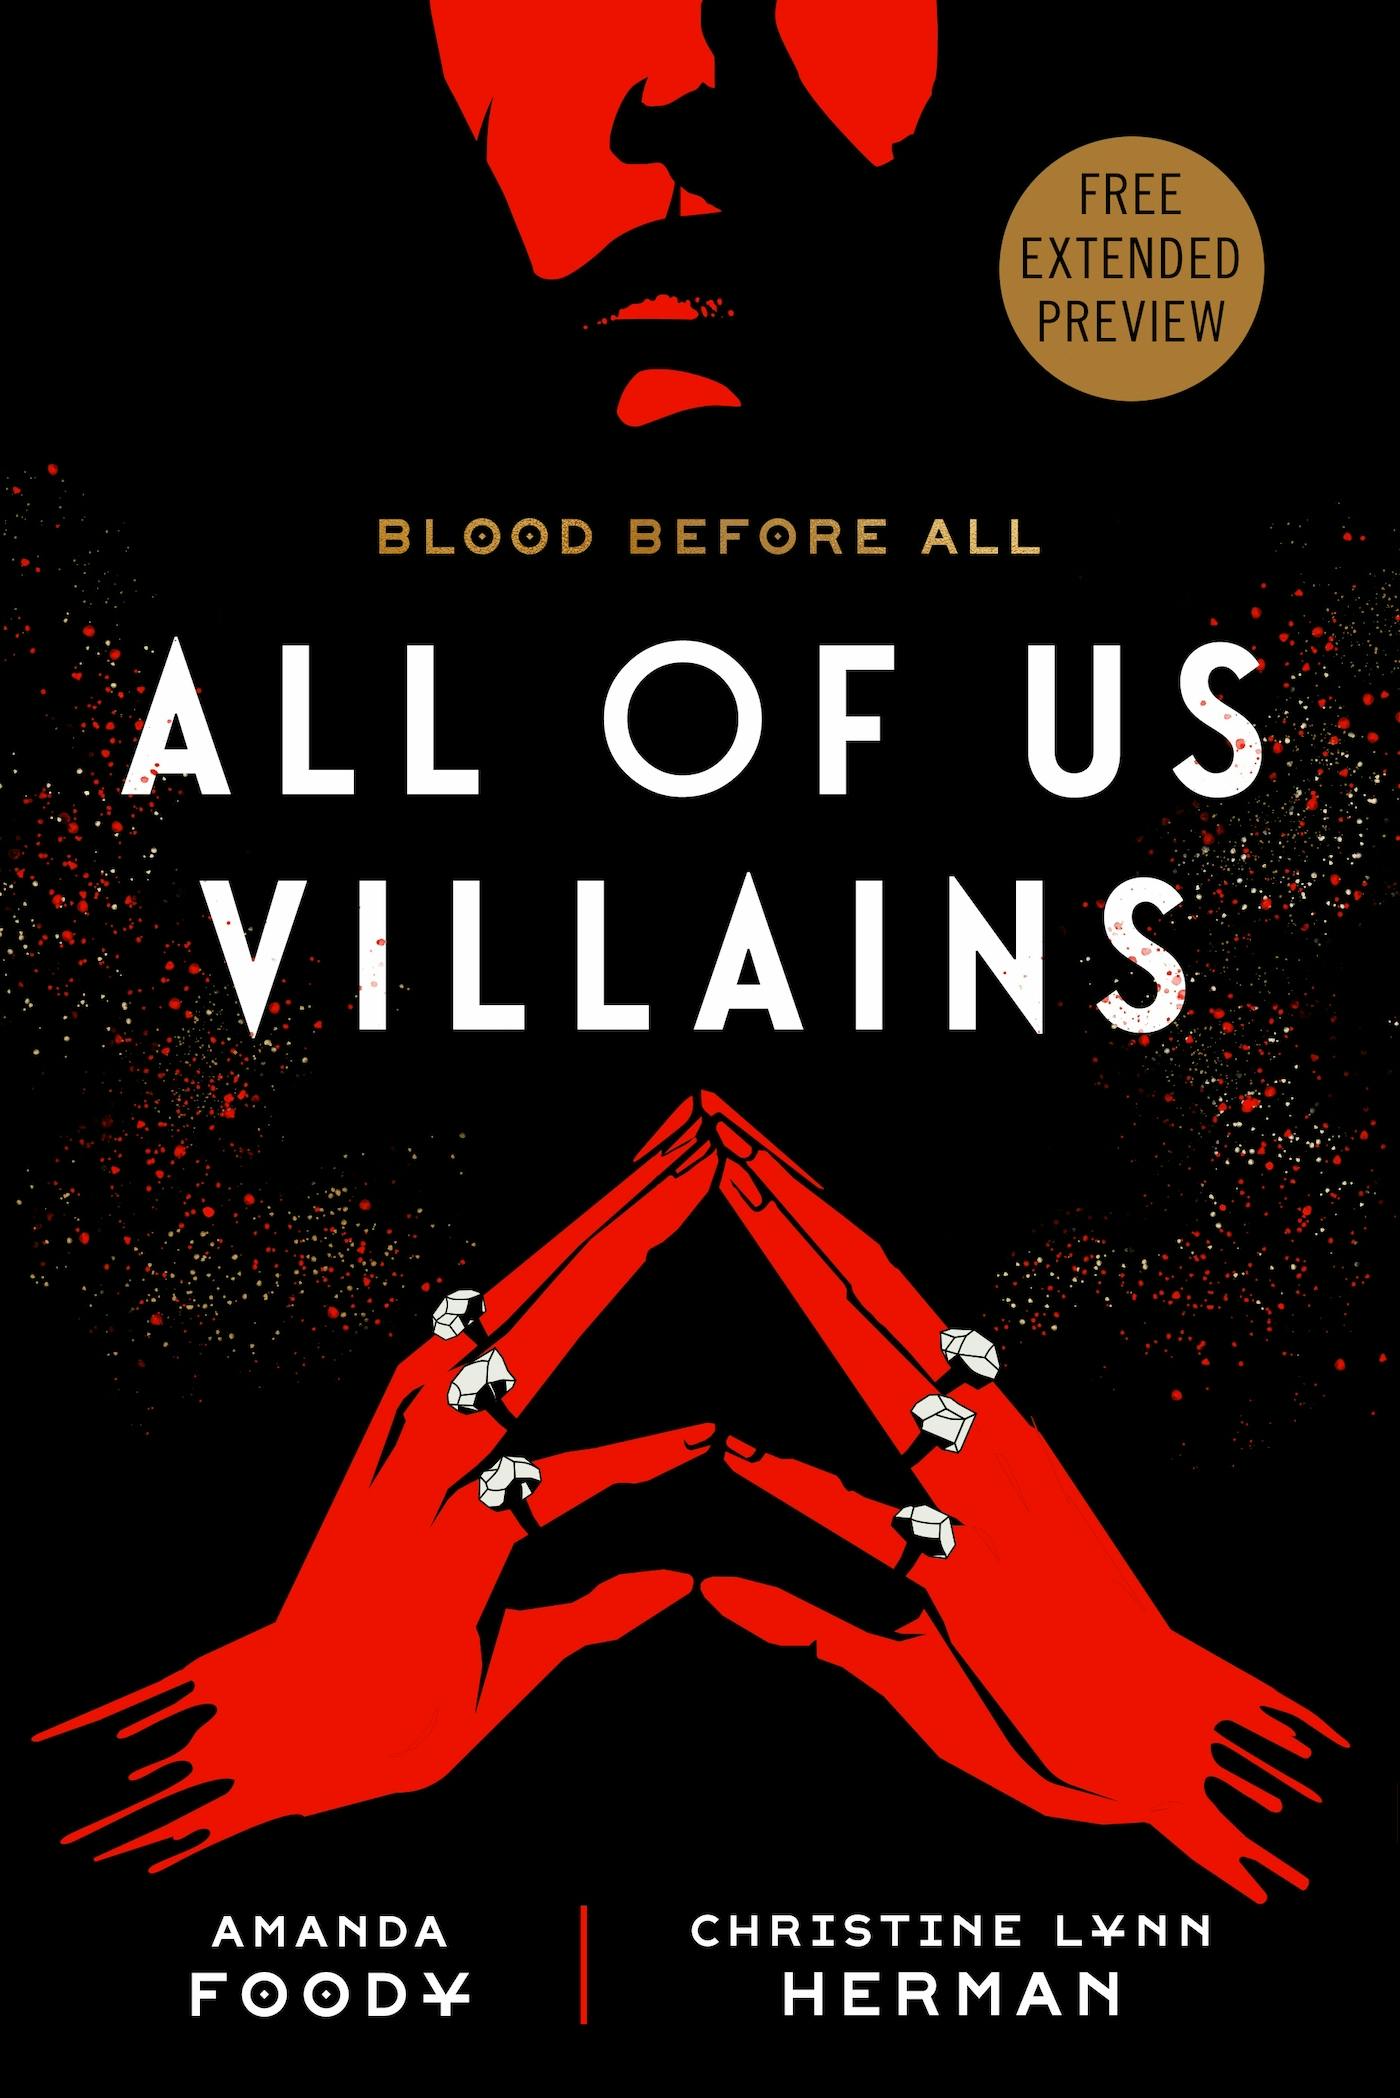 Cover for the book titled as: All of Us Villains Sneak Peek